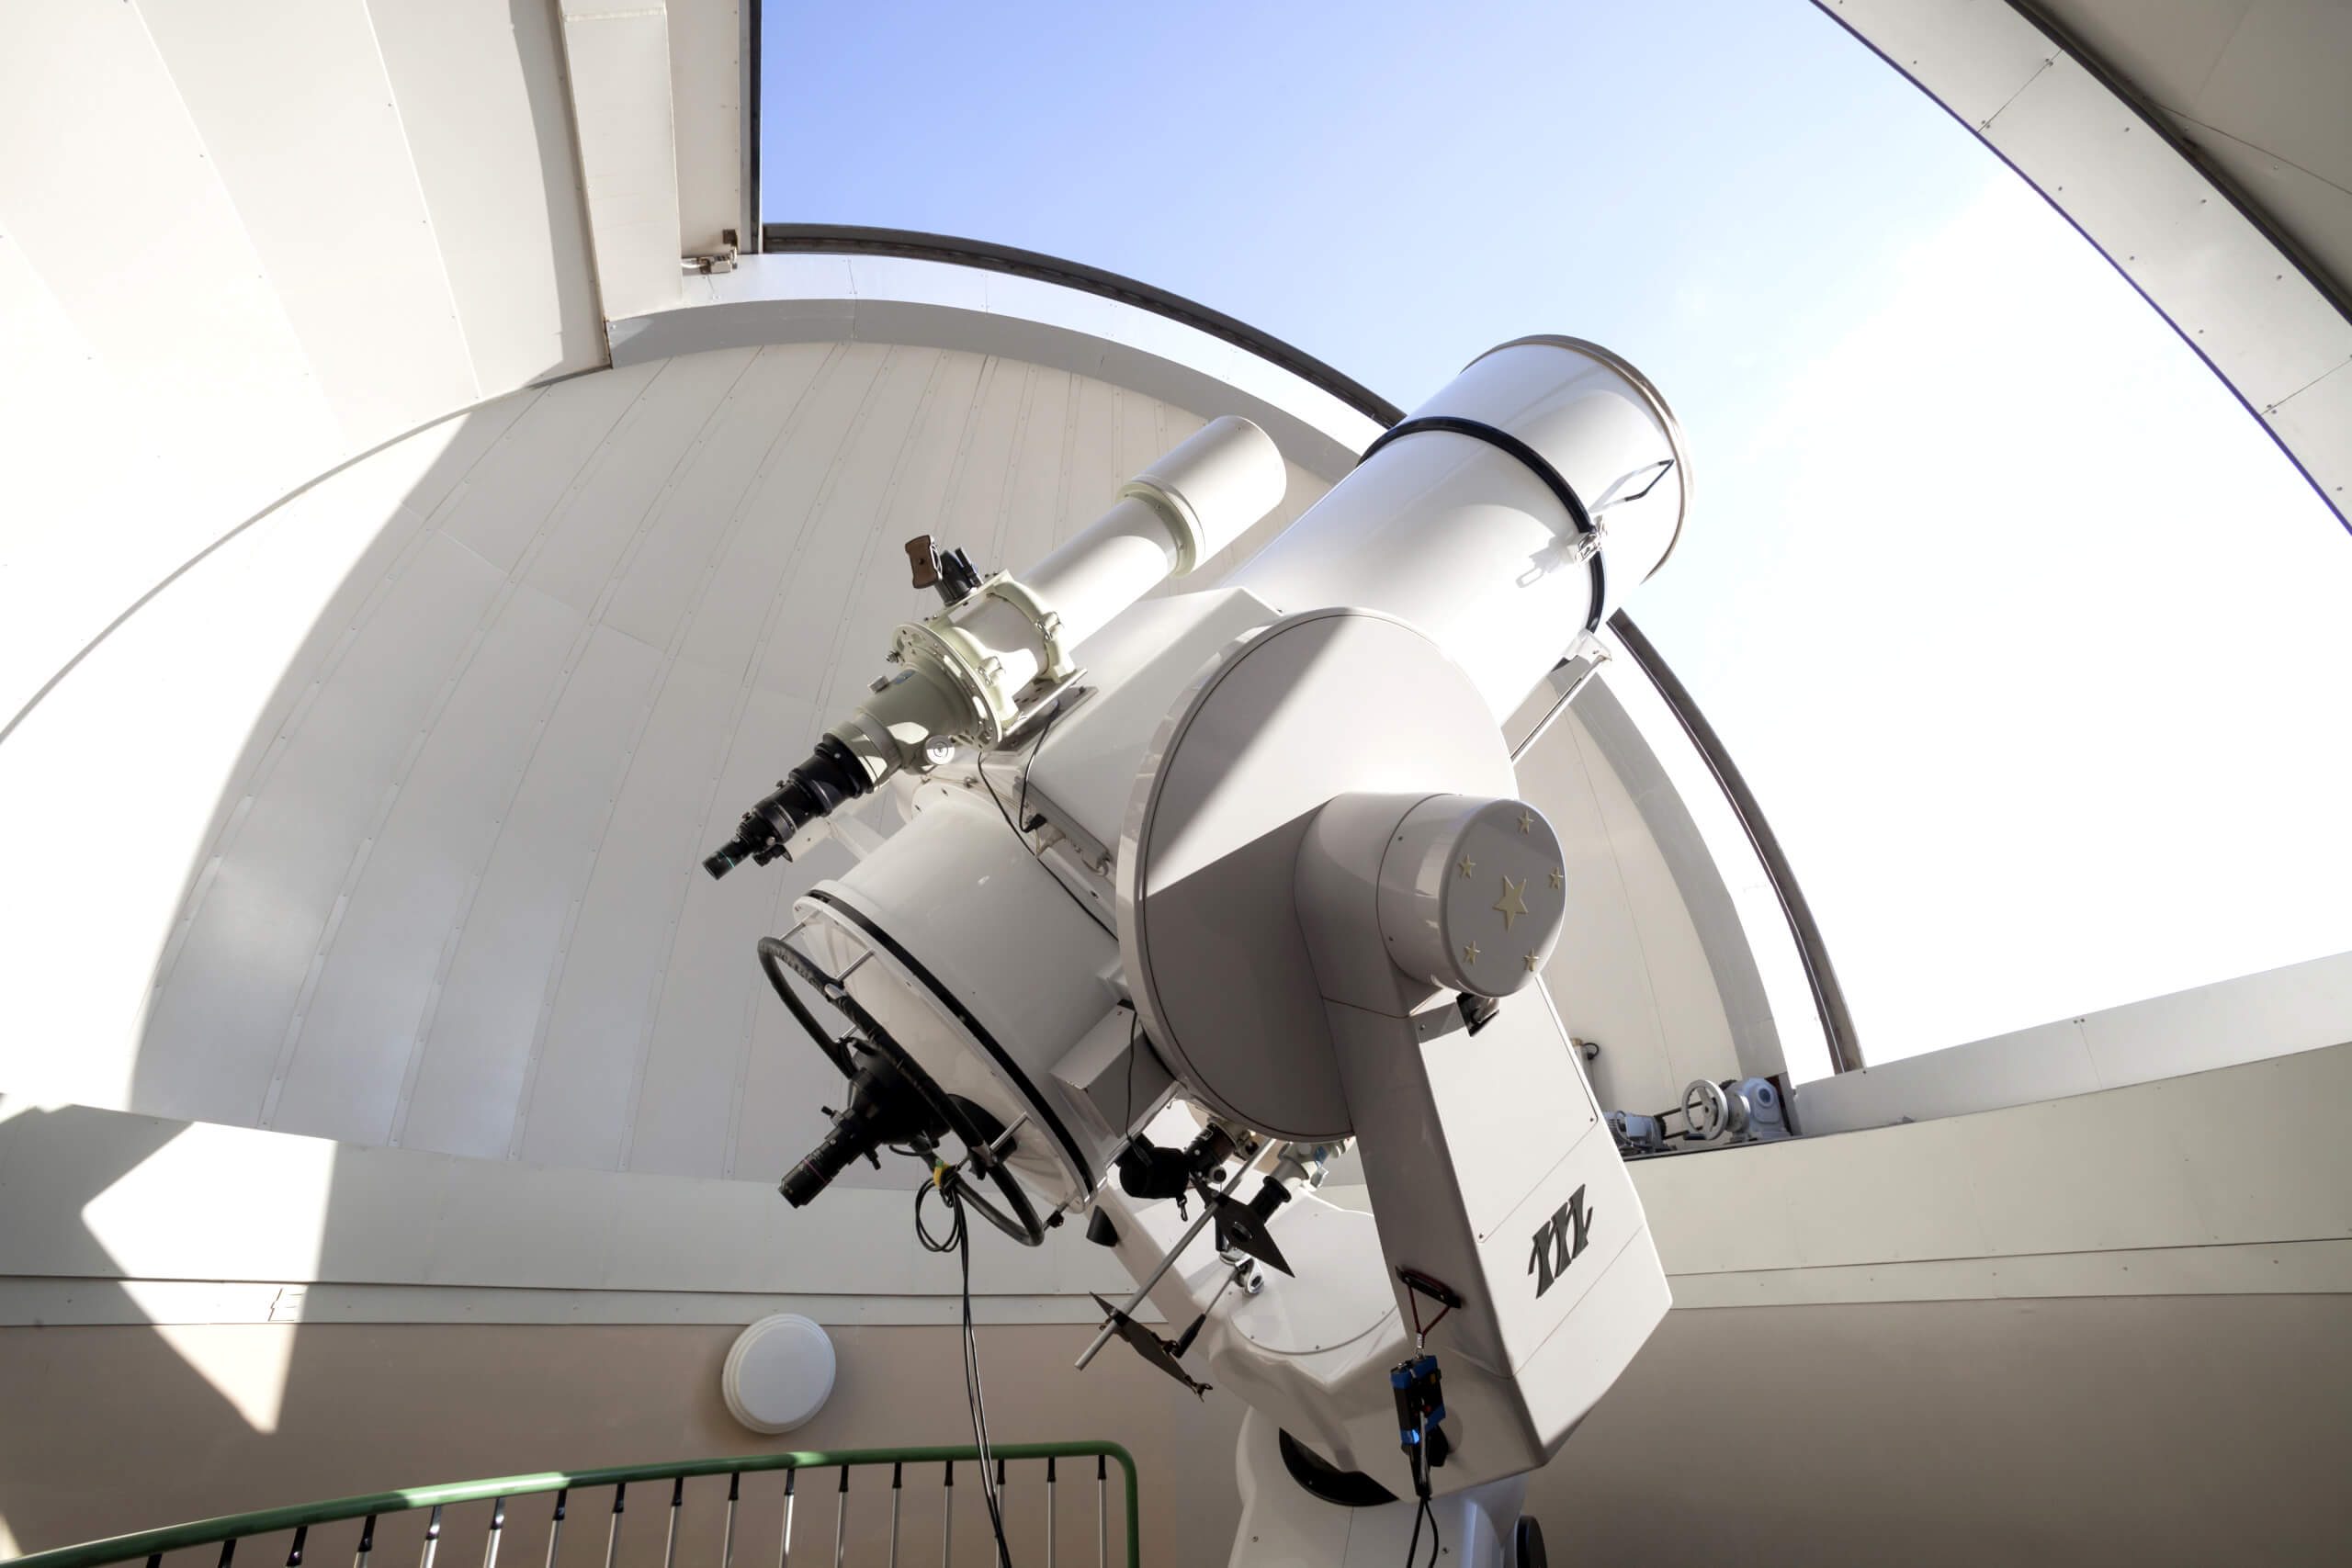 Exploring the Frontiers of Our Galaxy at the Shosanbetsu Astronomical Observatory